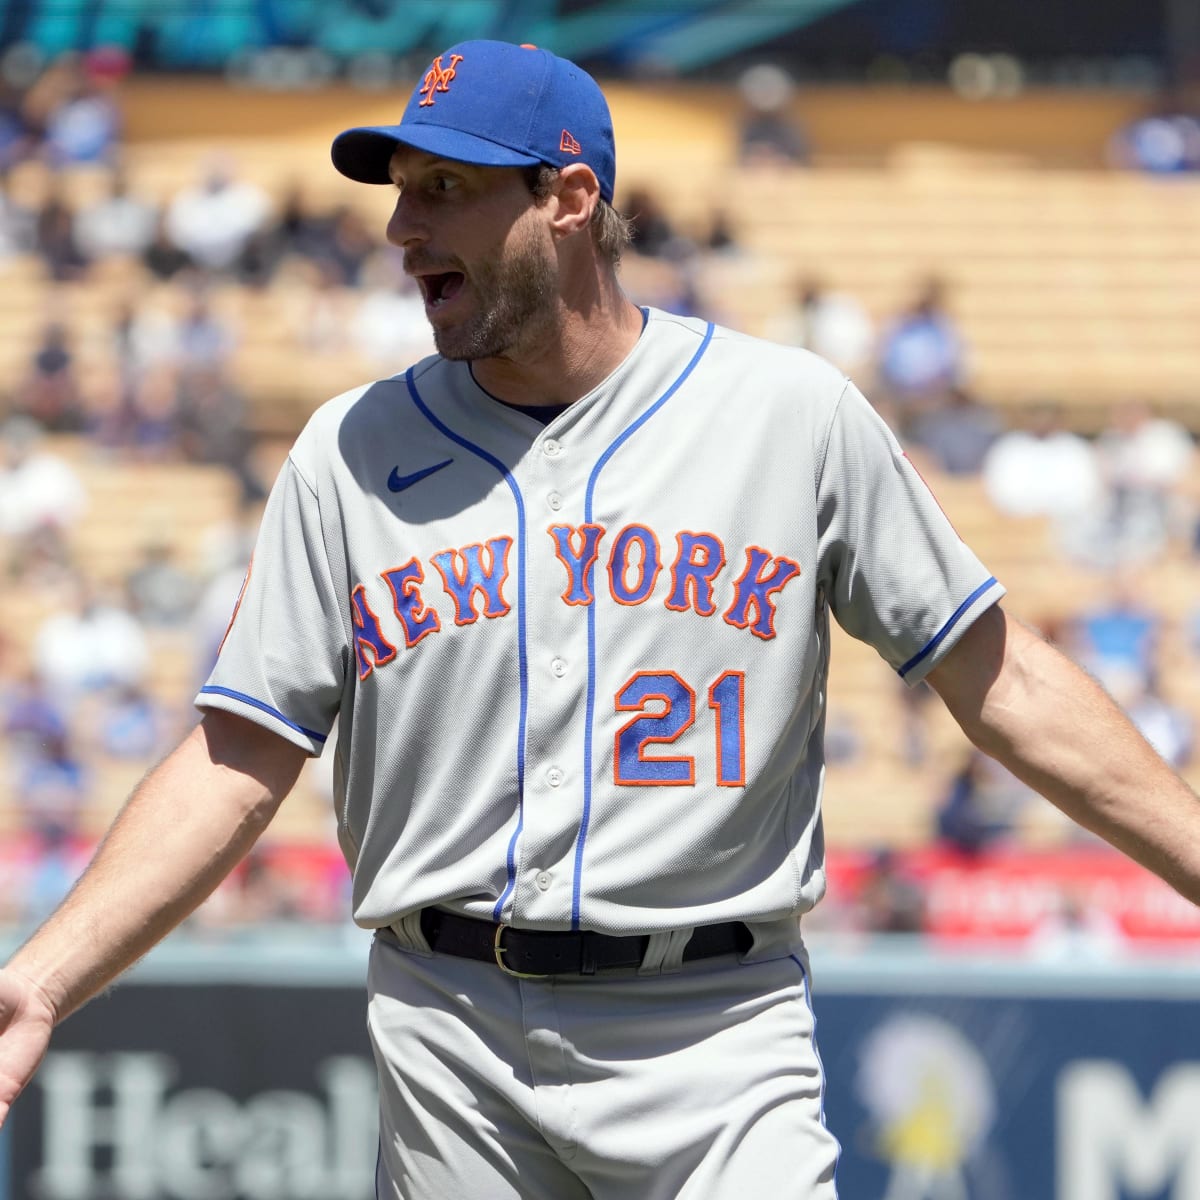 MLB Network - The Mets will send Max Scherzer out to the mound tonight  against the Braves, with his team holding onto a 3.5 game lead in the NL  East. Scherzer's stats